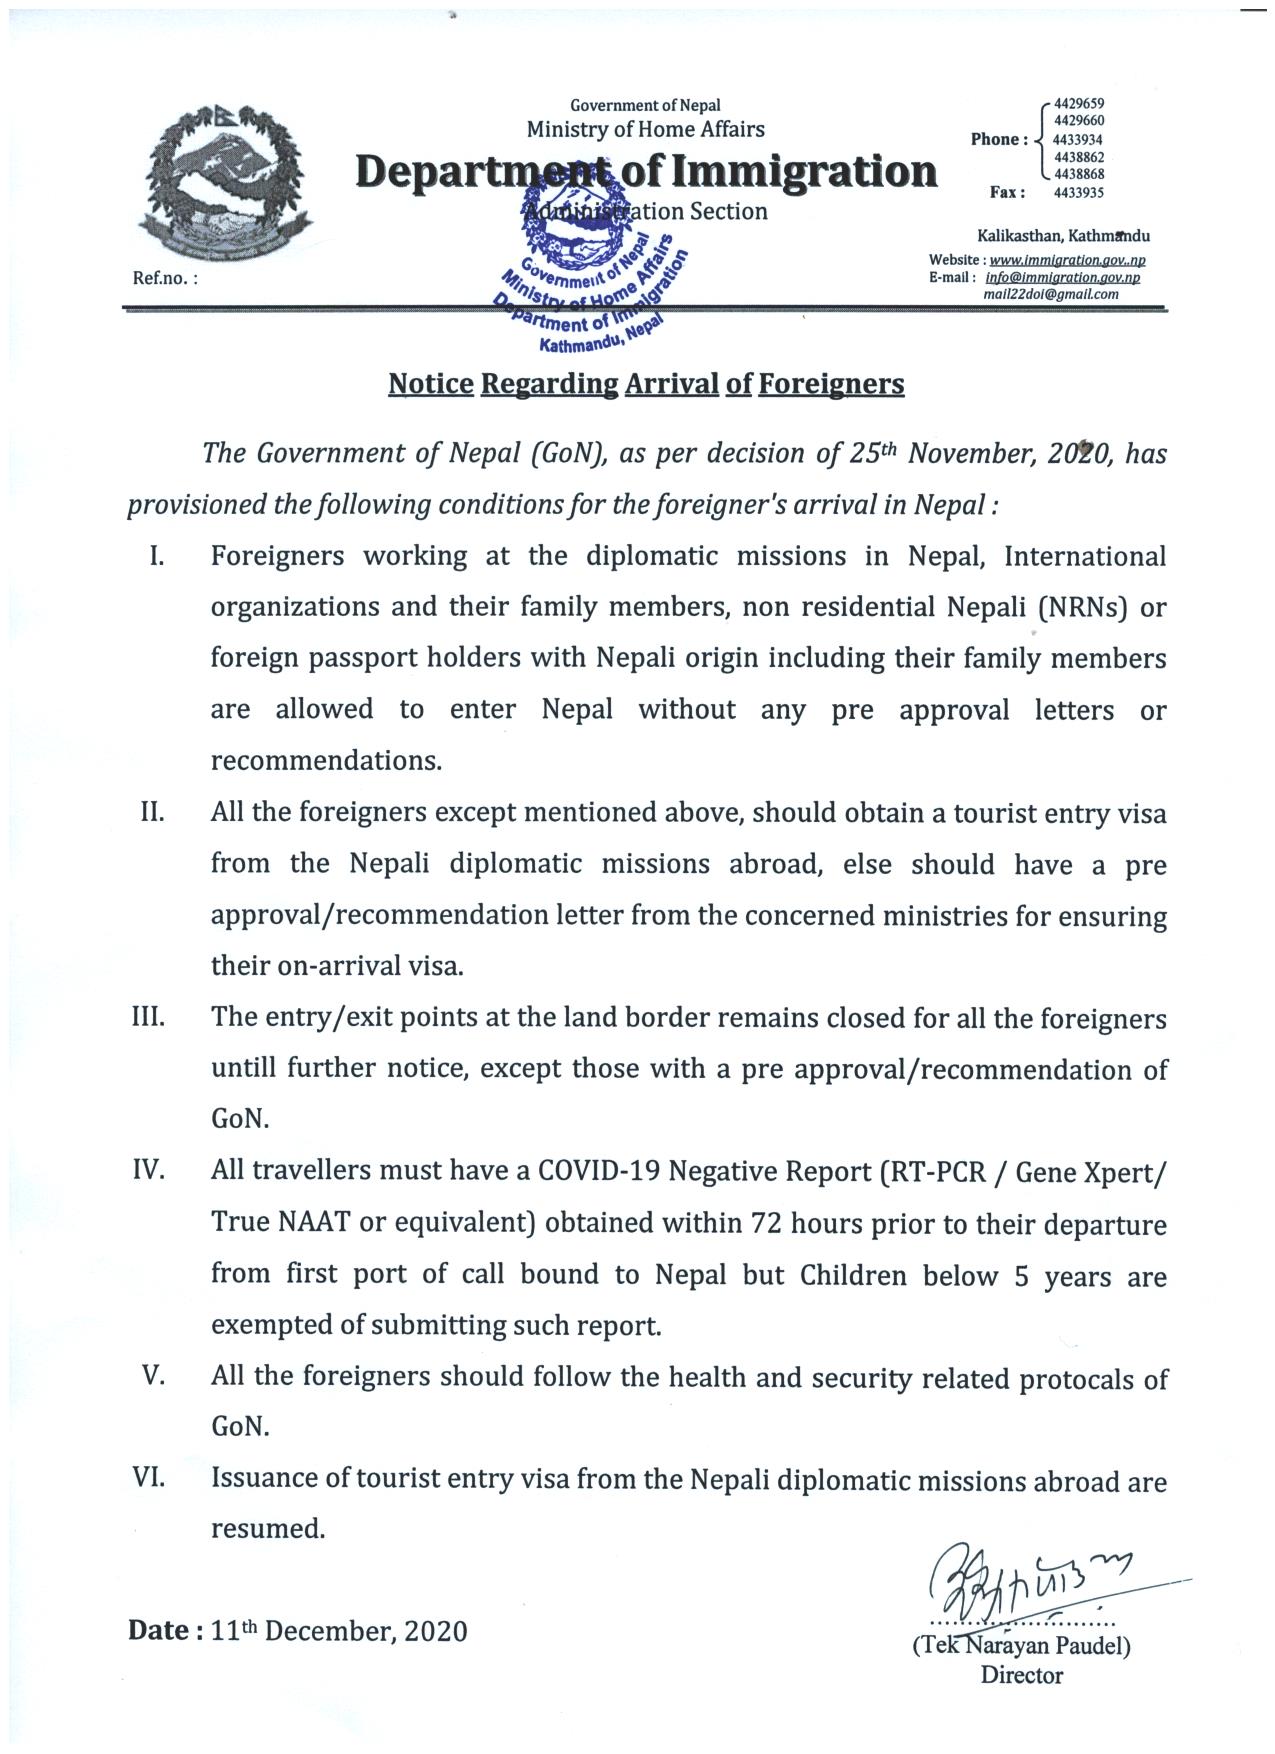 Featured image for “Notice regarding arrival of foreigners in Nepal”